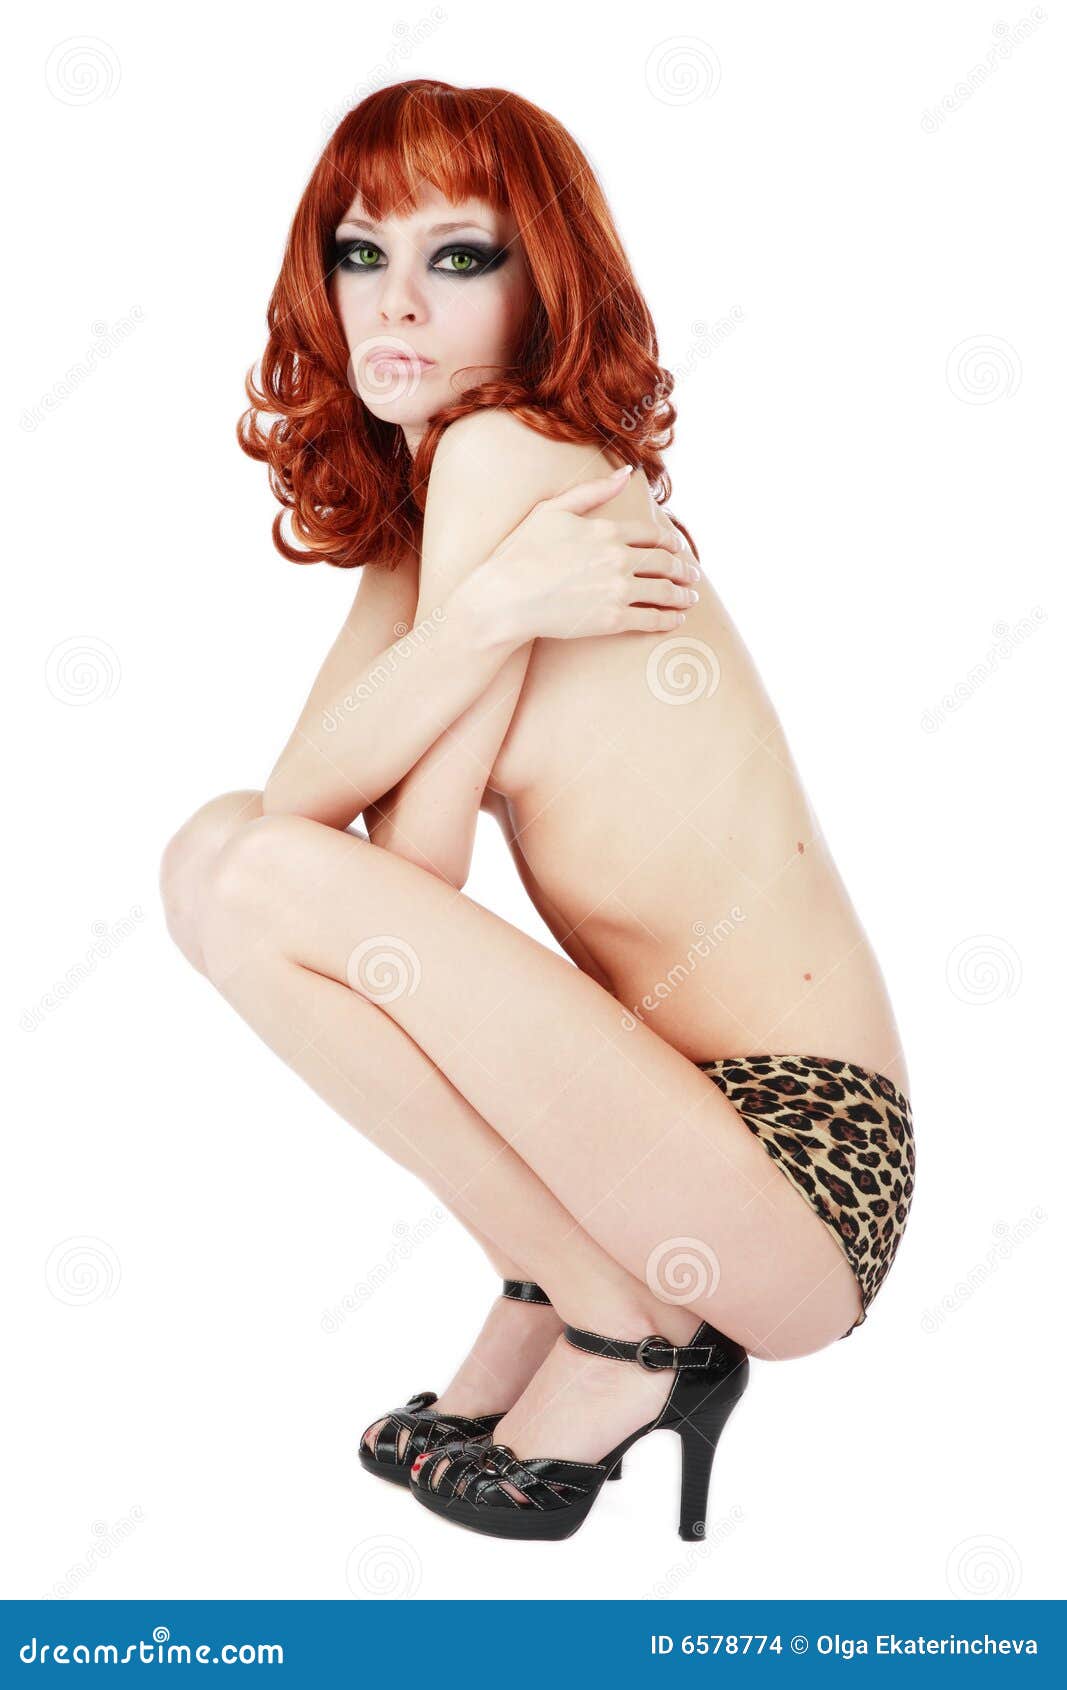 redhead. Beautiful slim red-headed girl in panties with leopard print and black stilettos sitting on white background